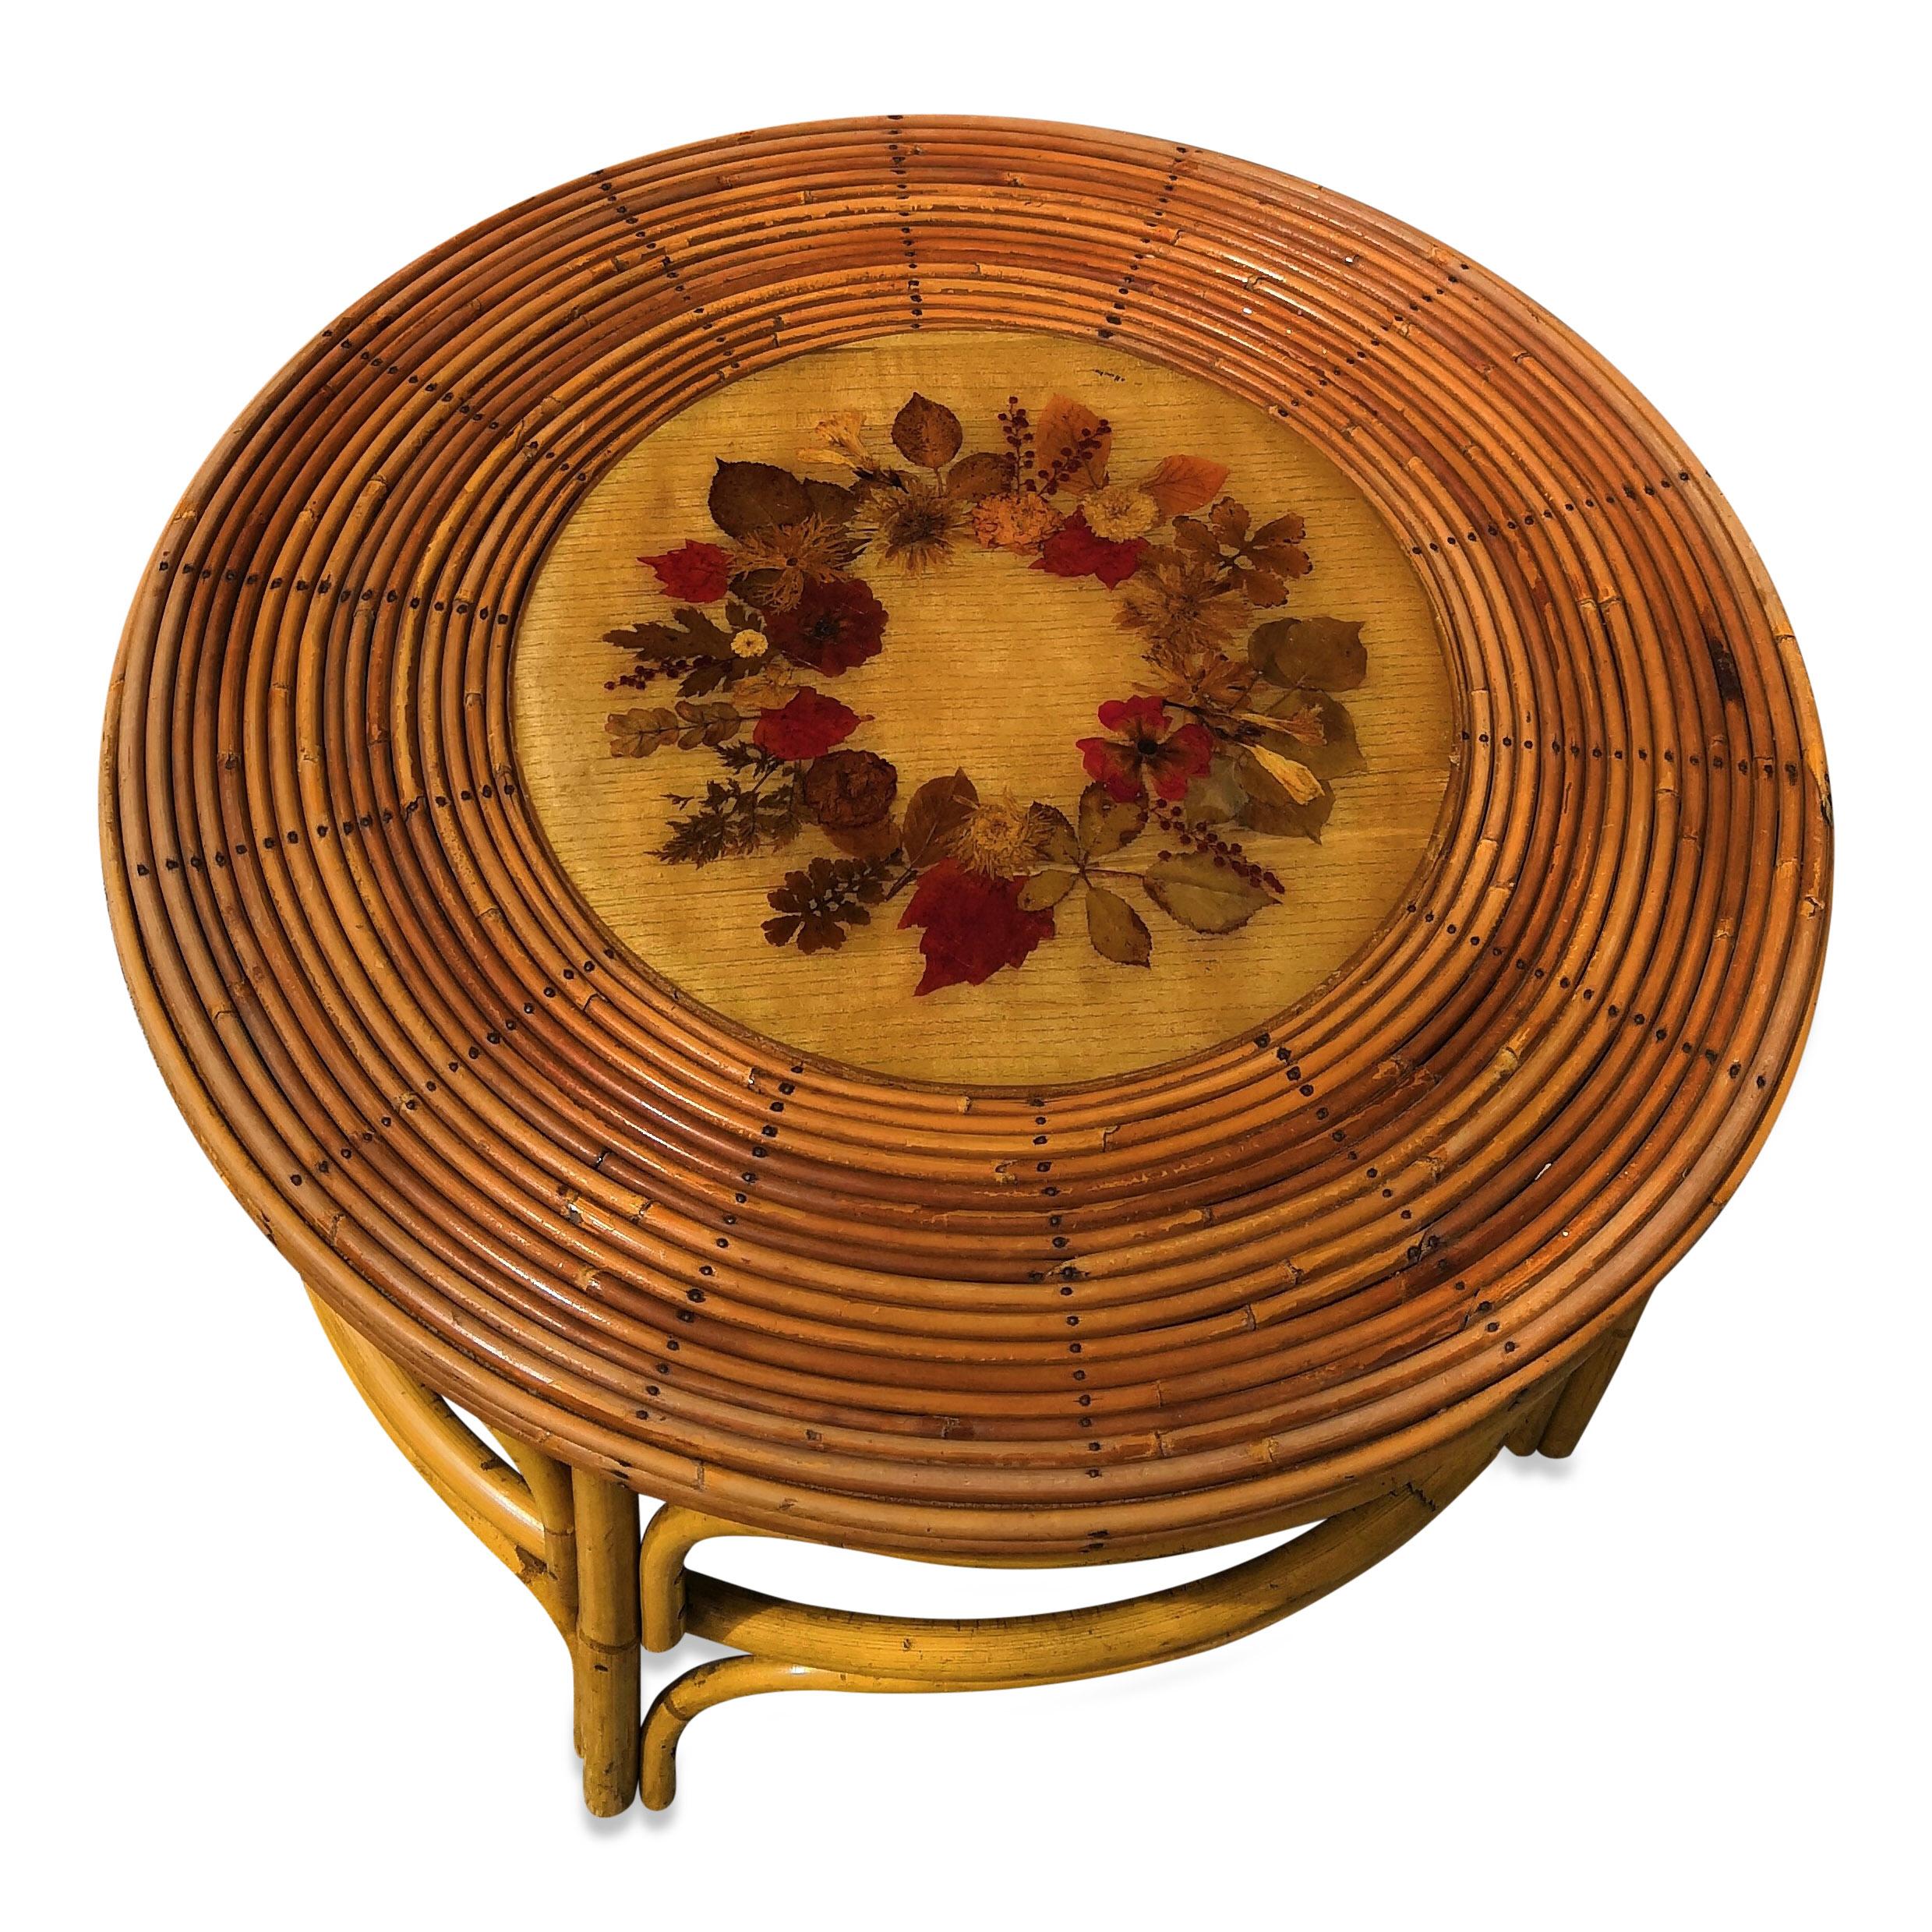 French Rattan Side Table with Floral Decor in Resin Center, France, 1950s